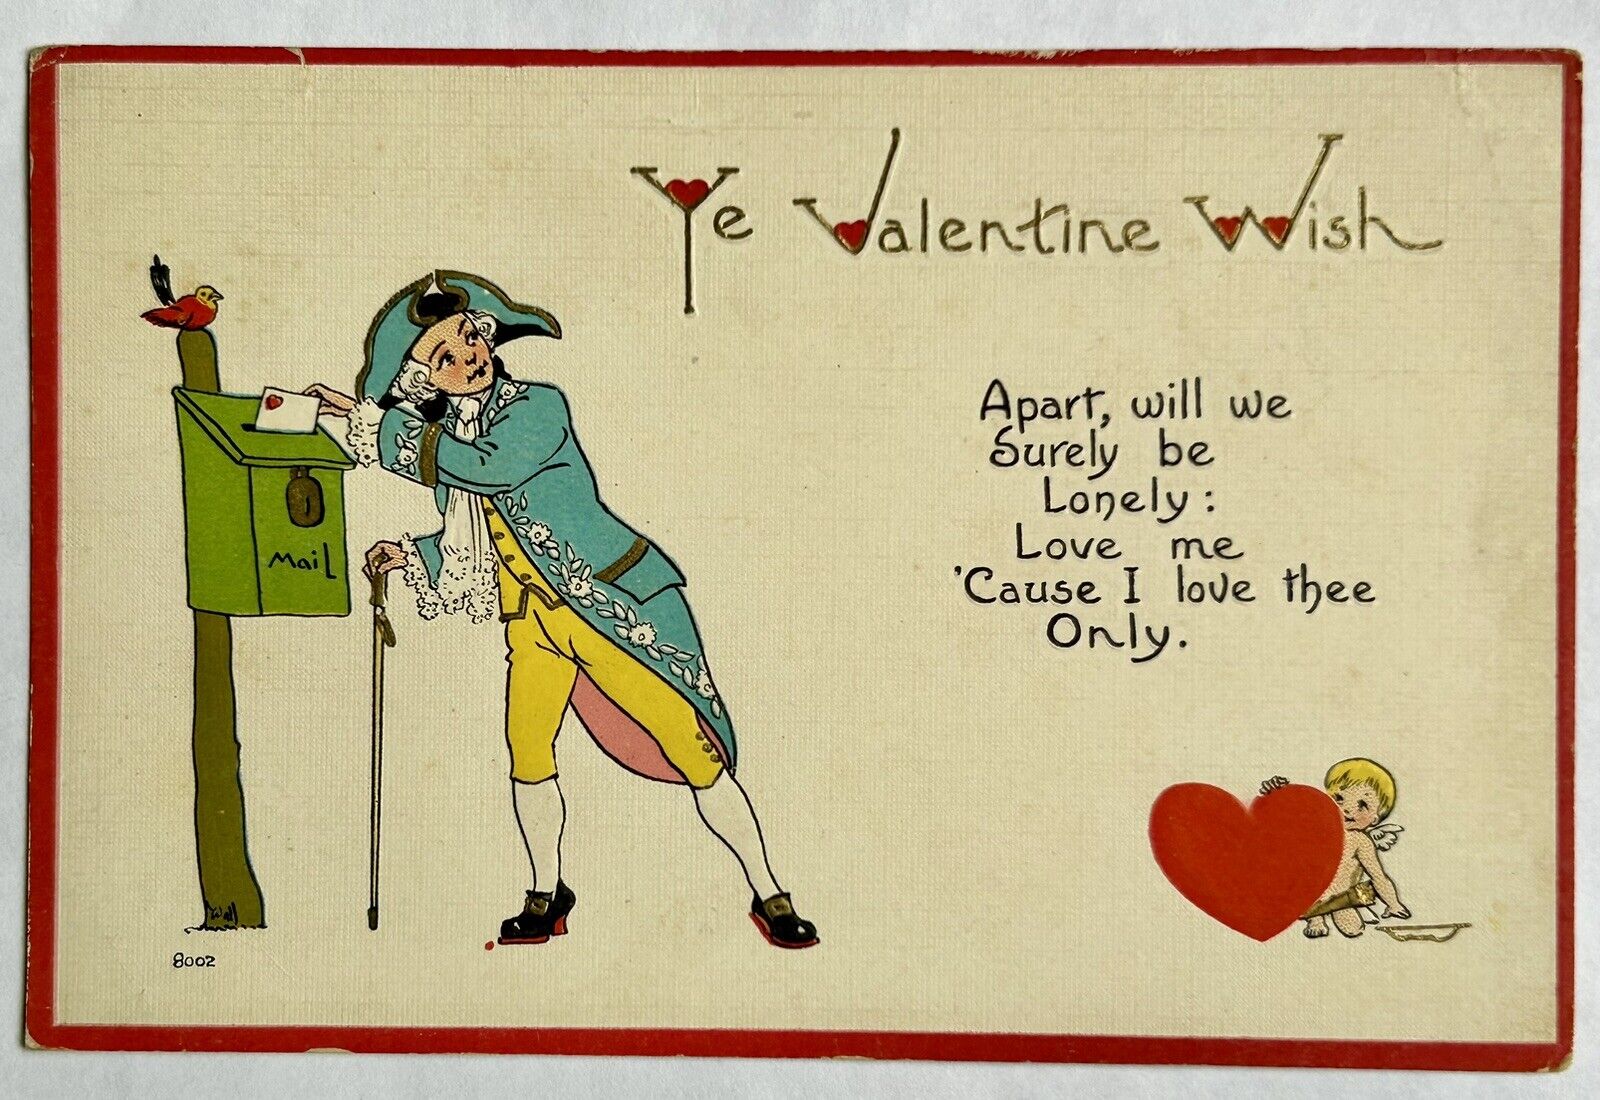 Valentines Wish. Early 1900s postcard. Love and romance. Hearts